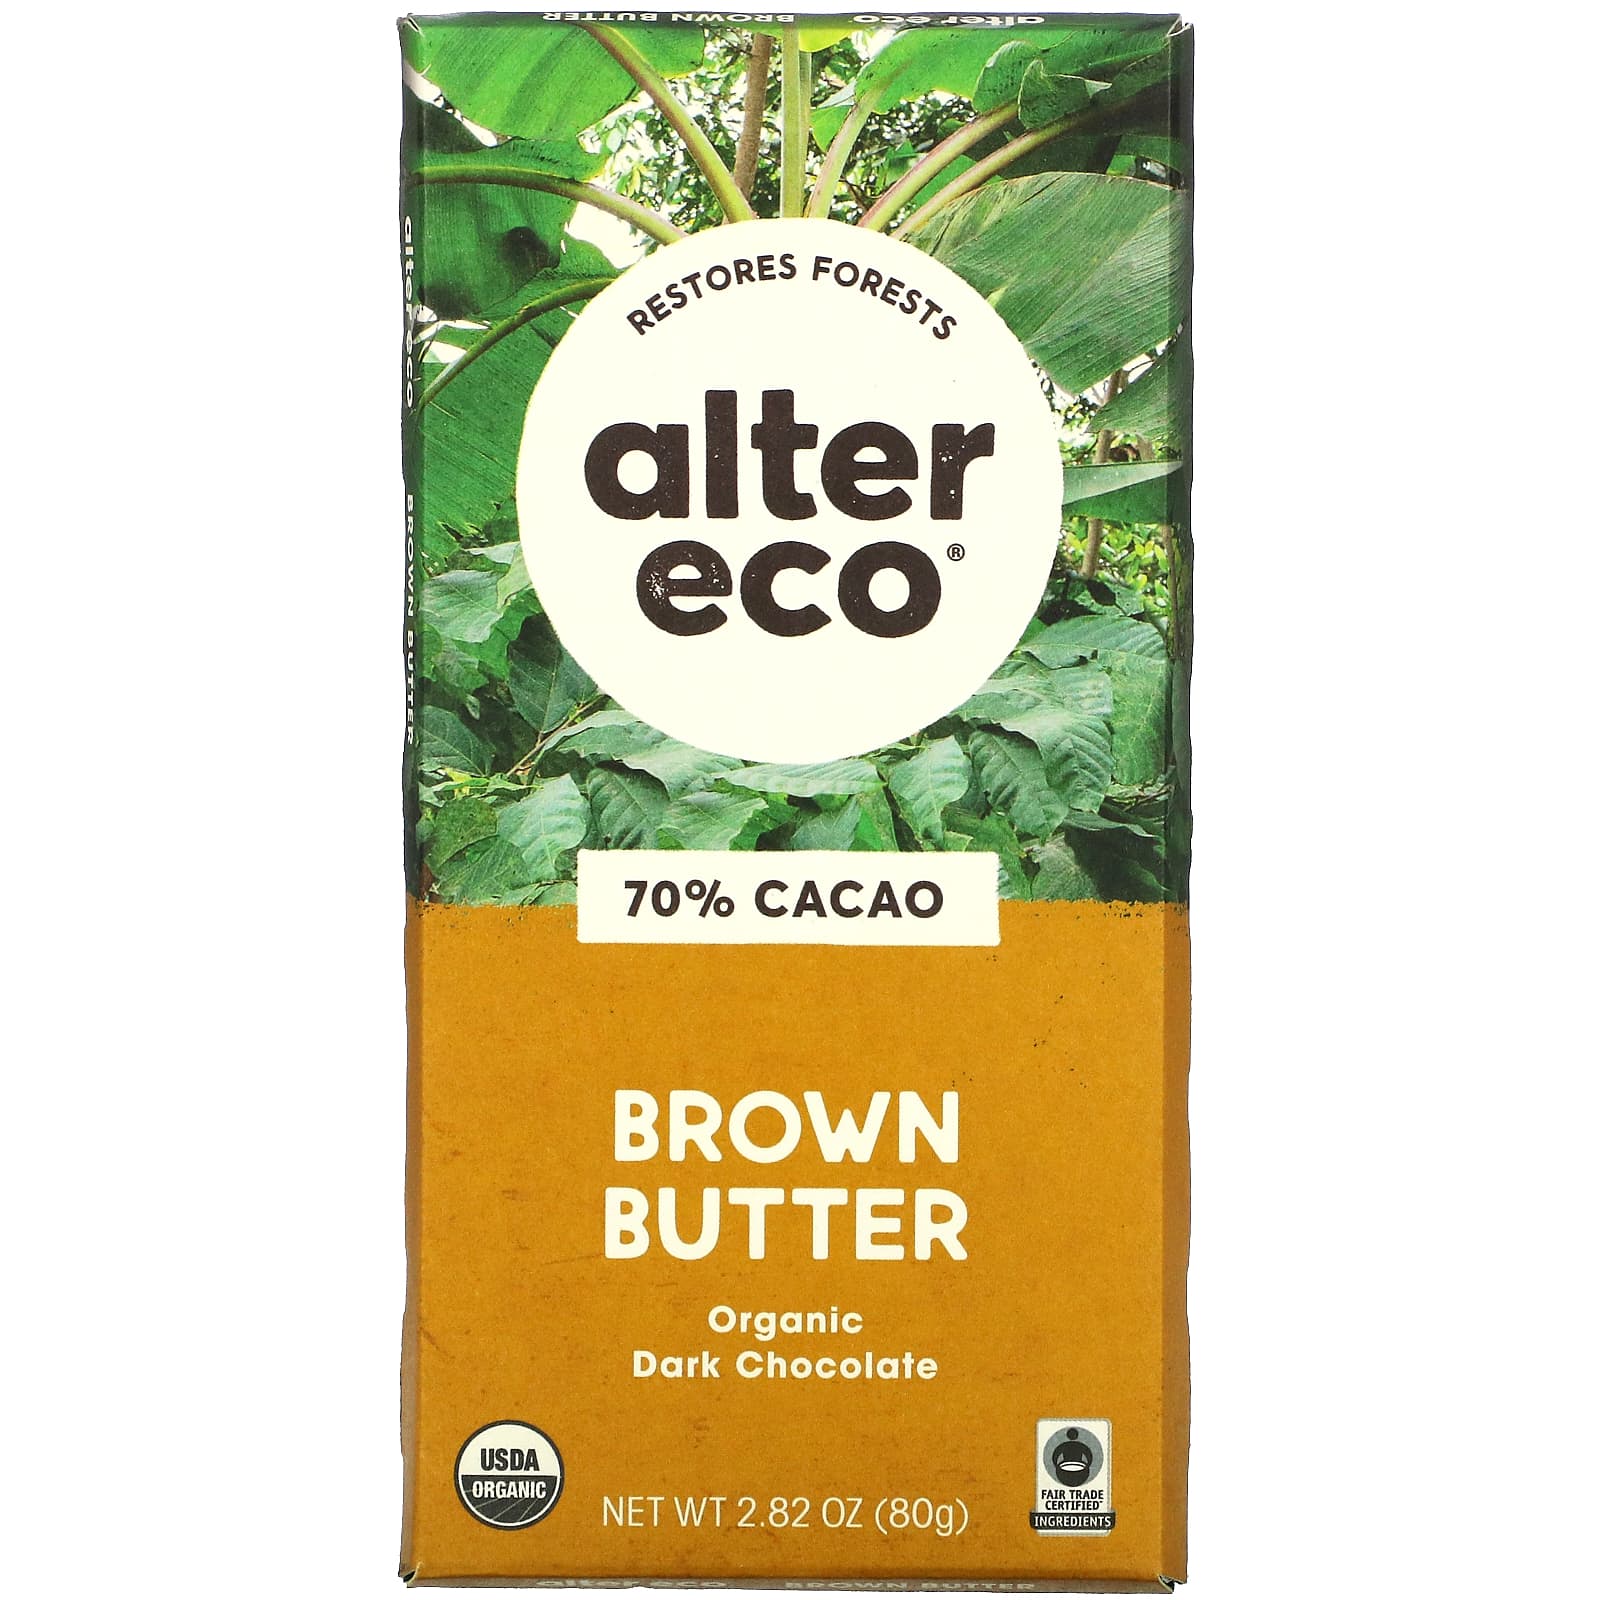 Alter Eco, Organic Dark Chocolate, Brown Butter, 70% Cacao, 2.82 oz (80 g)